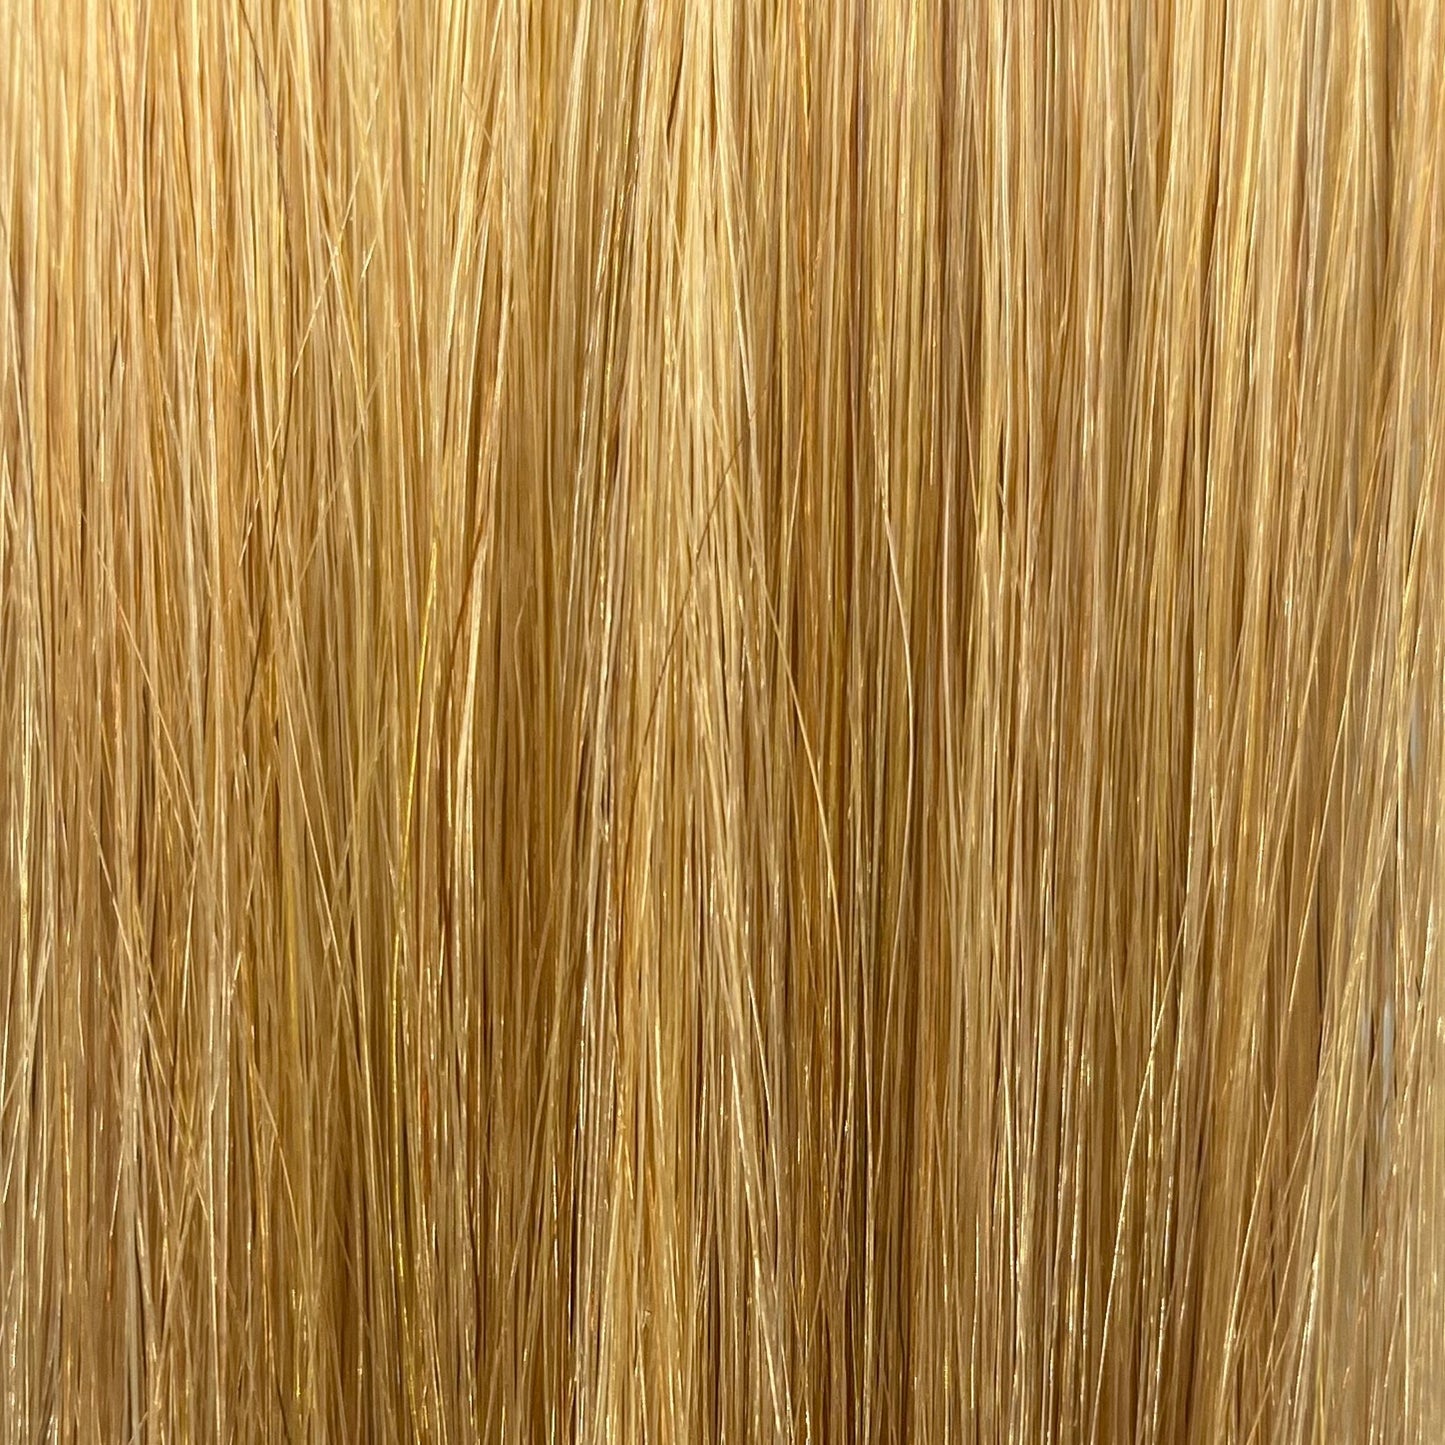 Fusion hair extensions #DB3 - 40cm/16 inches - Golden Blonde Fusion Euro So Cap 